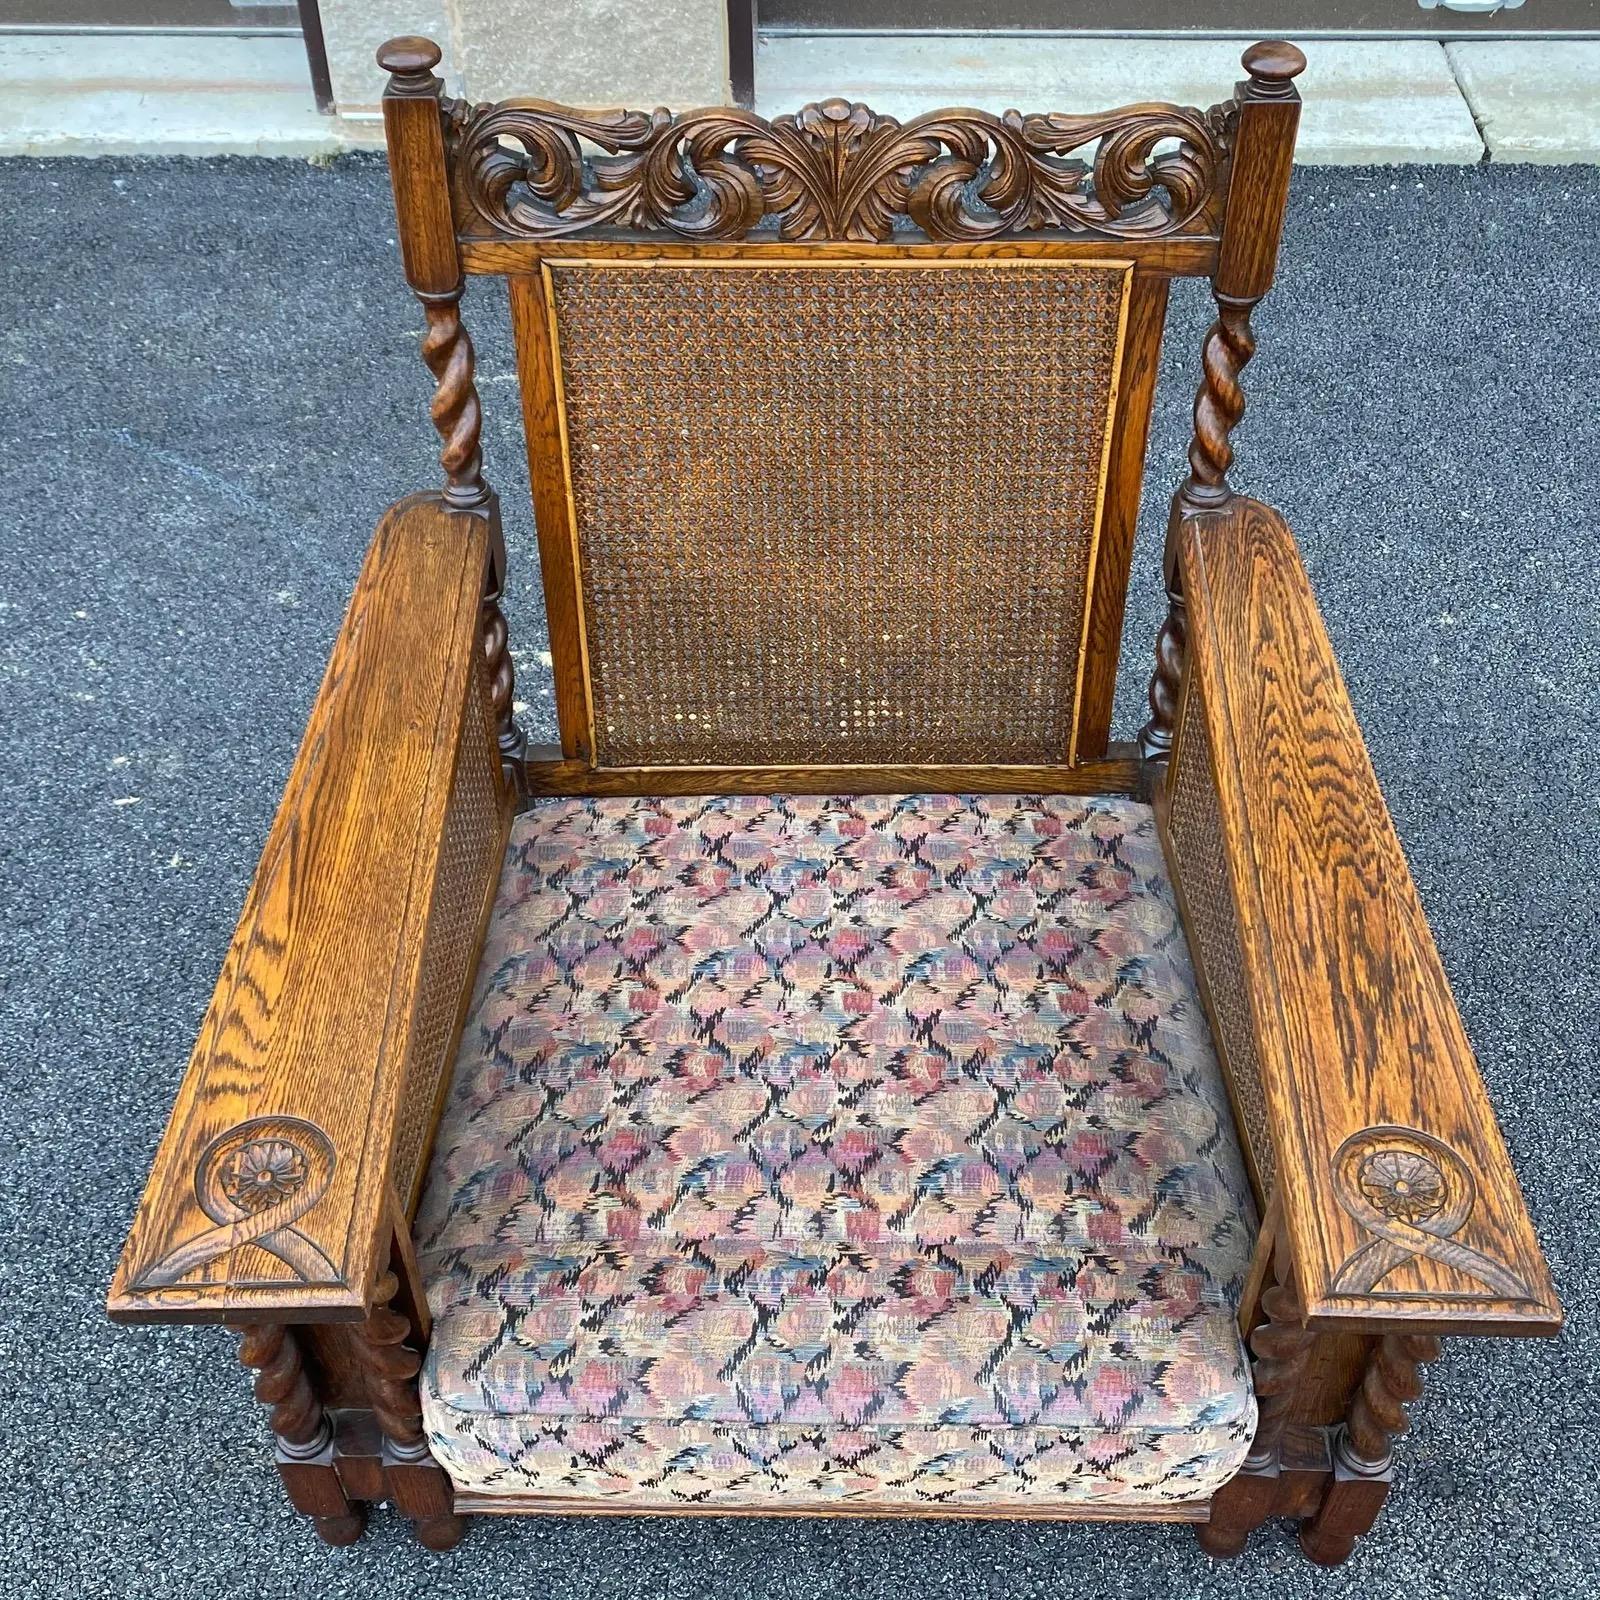 Antique Carved English Oak Barley Twist Lounge Chair With Caned Back & Sides For Sale 3